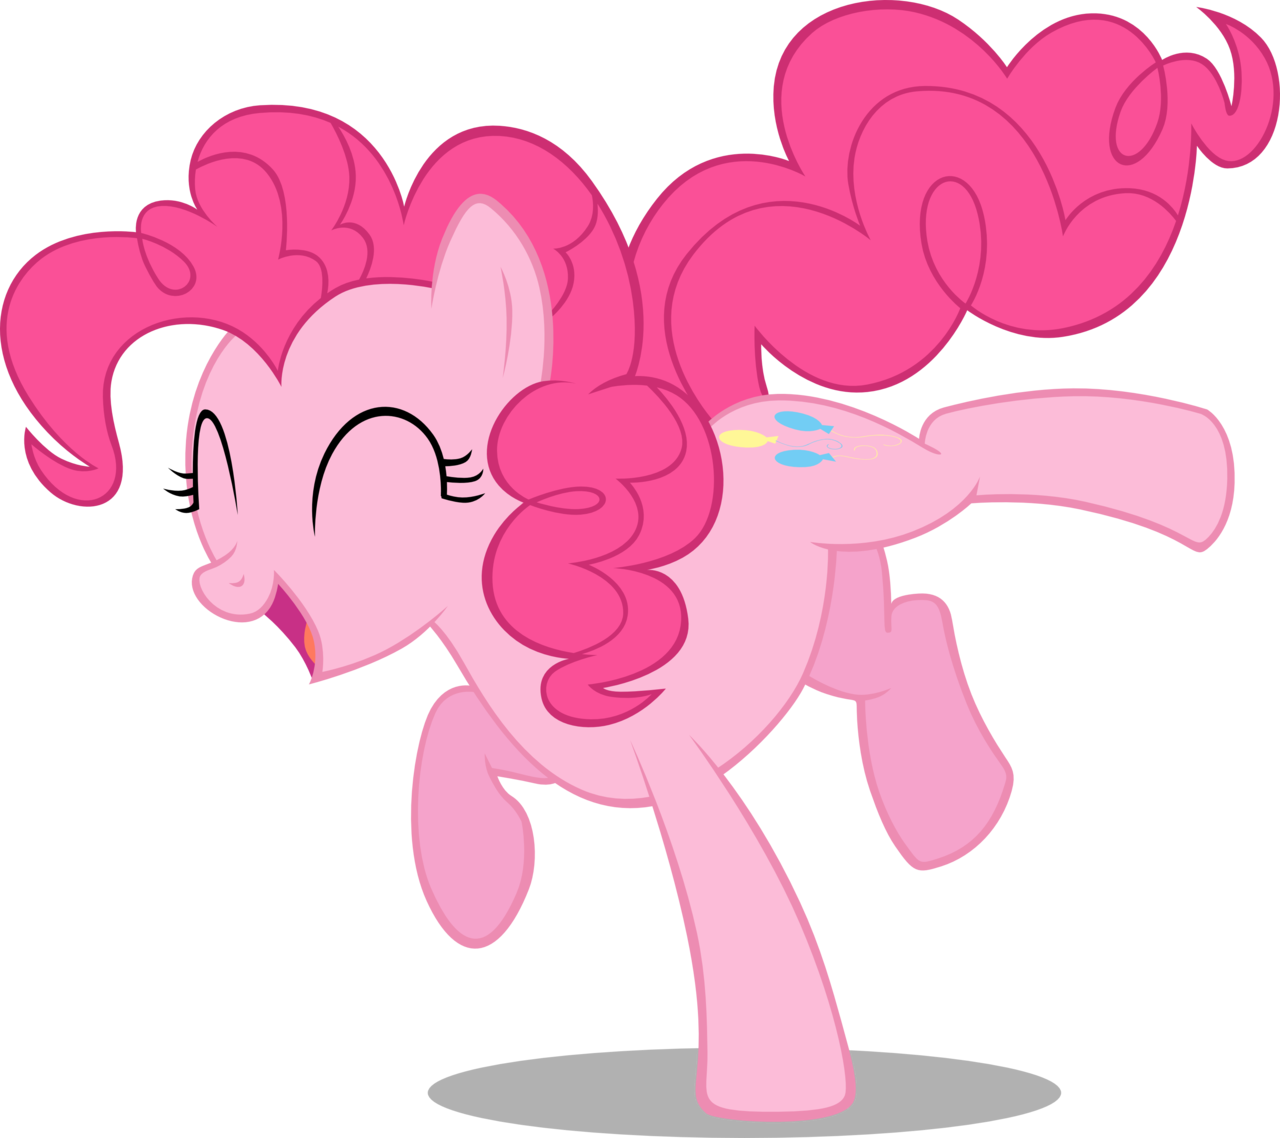 Pinkie pie party time by takua770-d4jg1pe.png